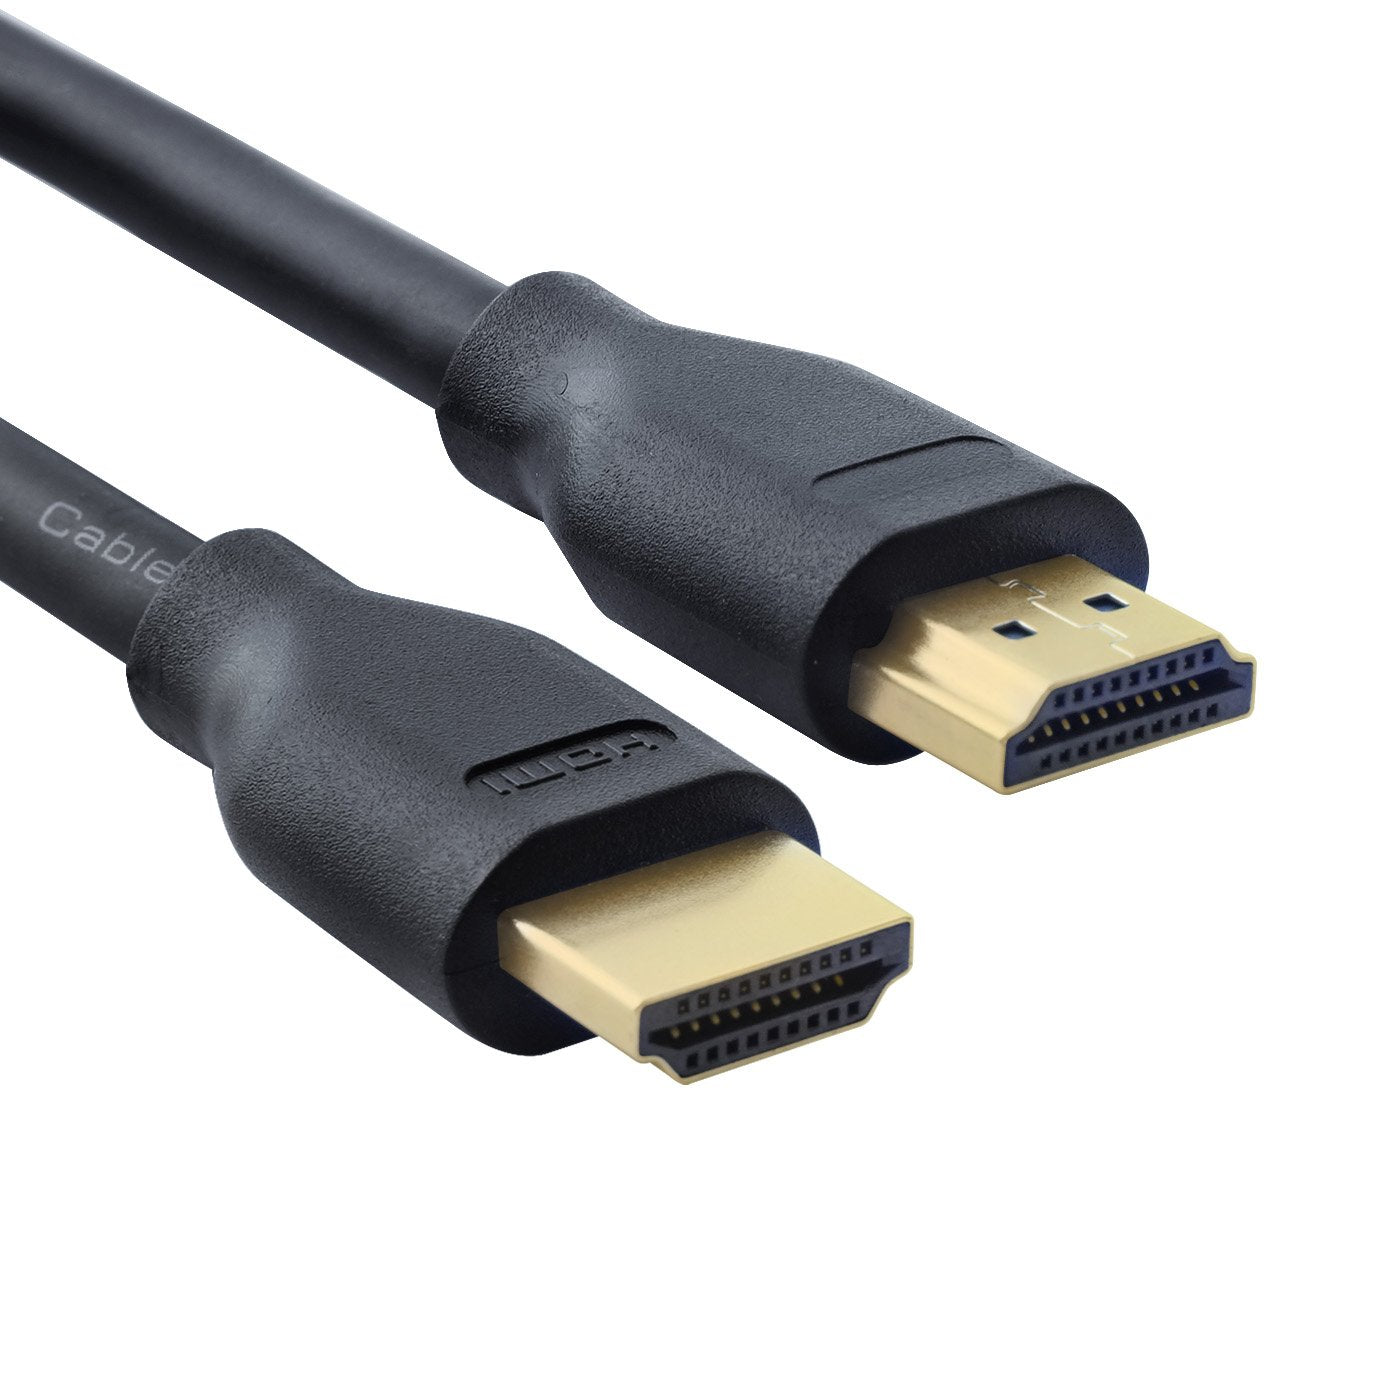 1.5m Ultra High Speed Premium HDMI Cable / Lead v2.1 - 48Gbps/ 8K/ 60Hz (C-HDMI2.1-1.5)